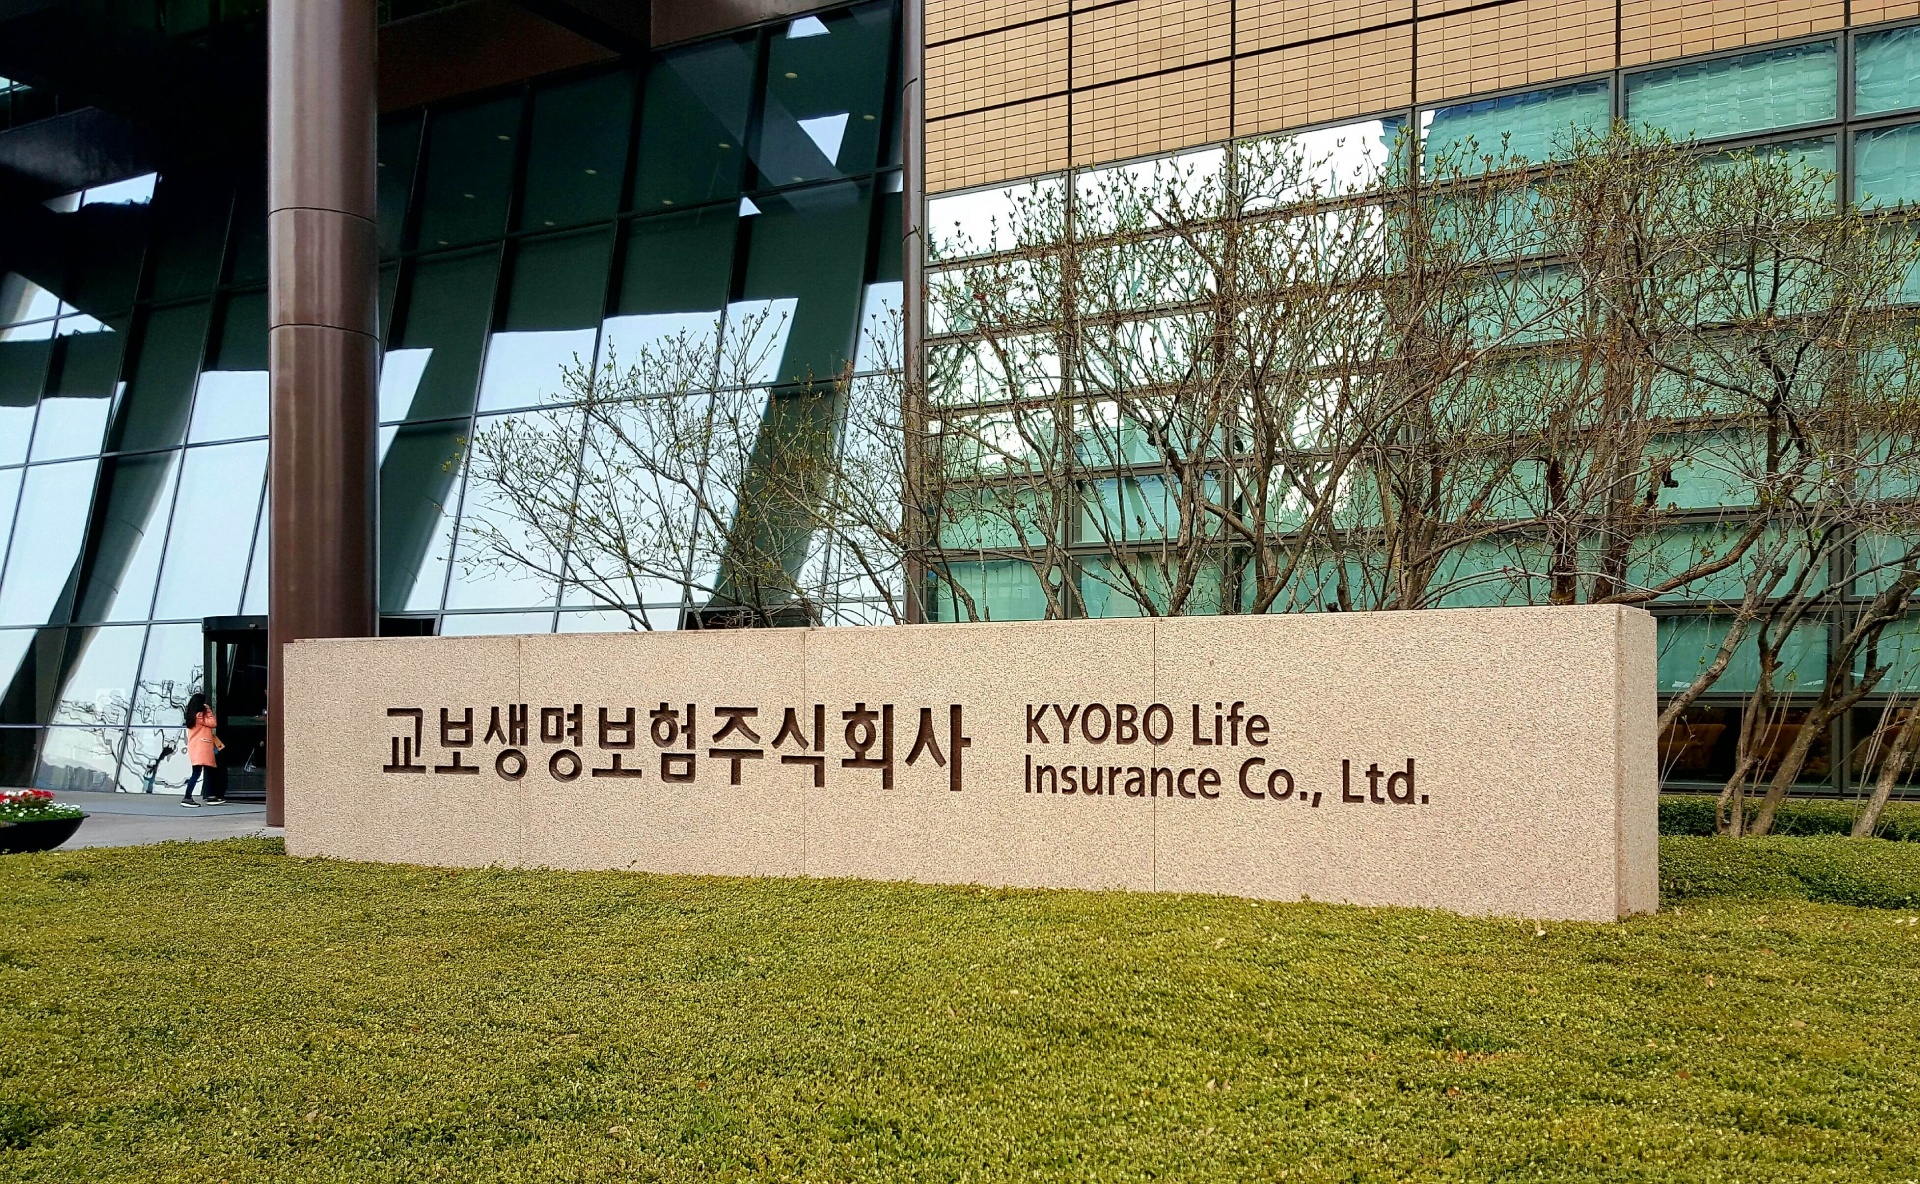 Kyobo Life Insurance in talks with potential Vietnamese partners